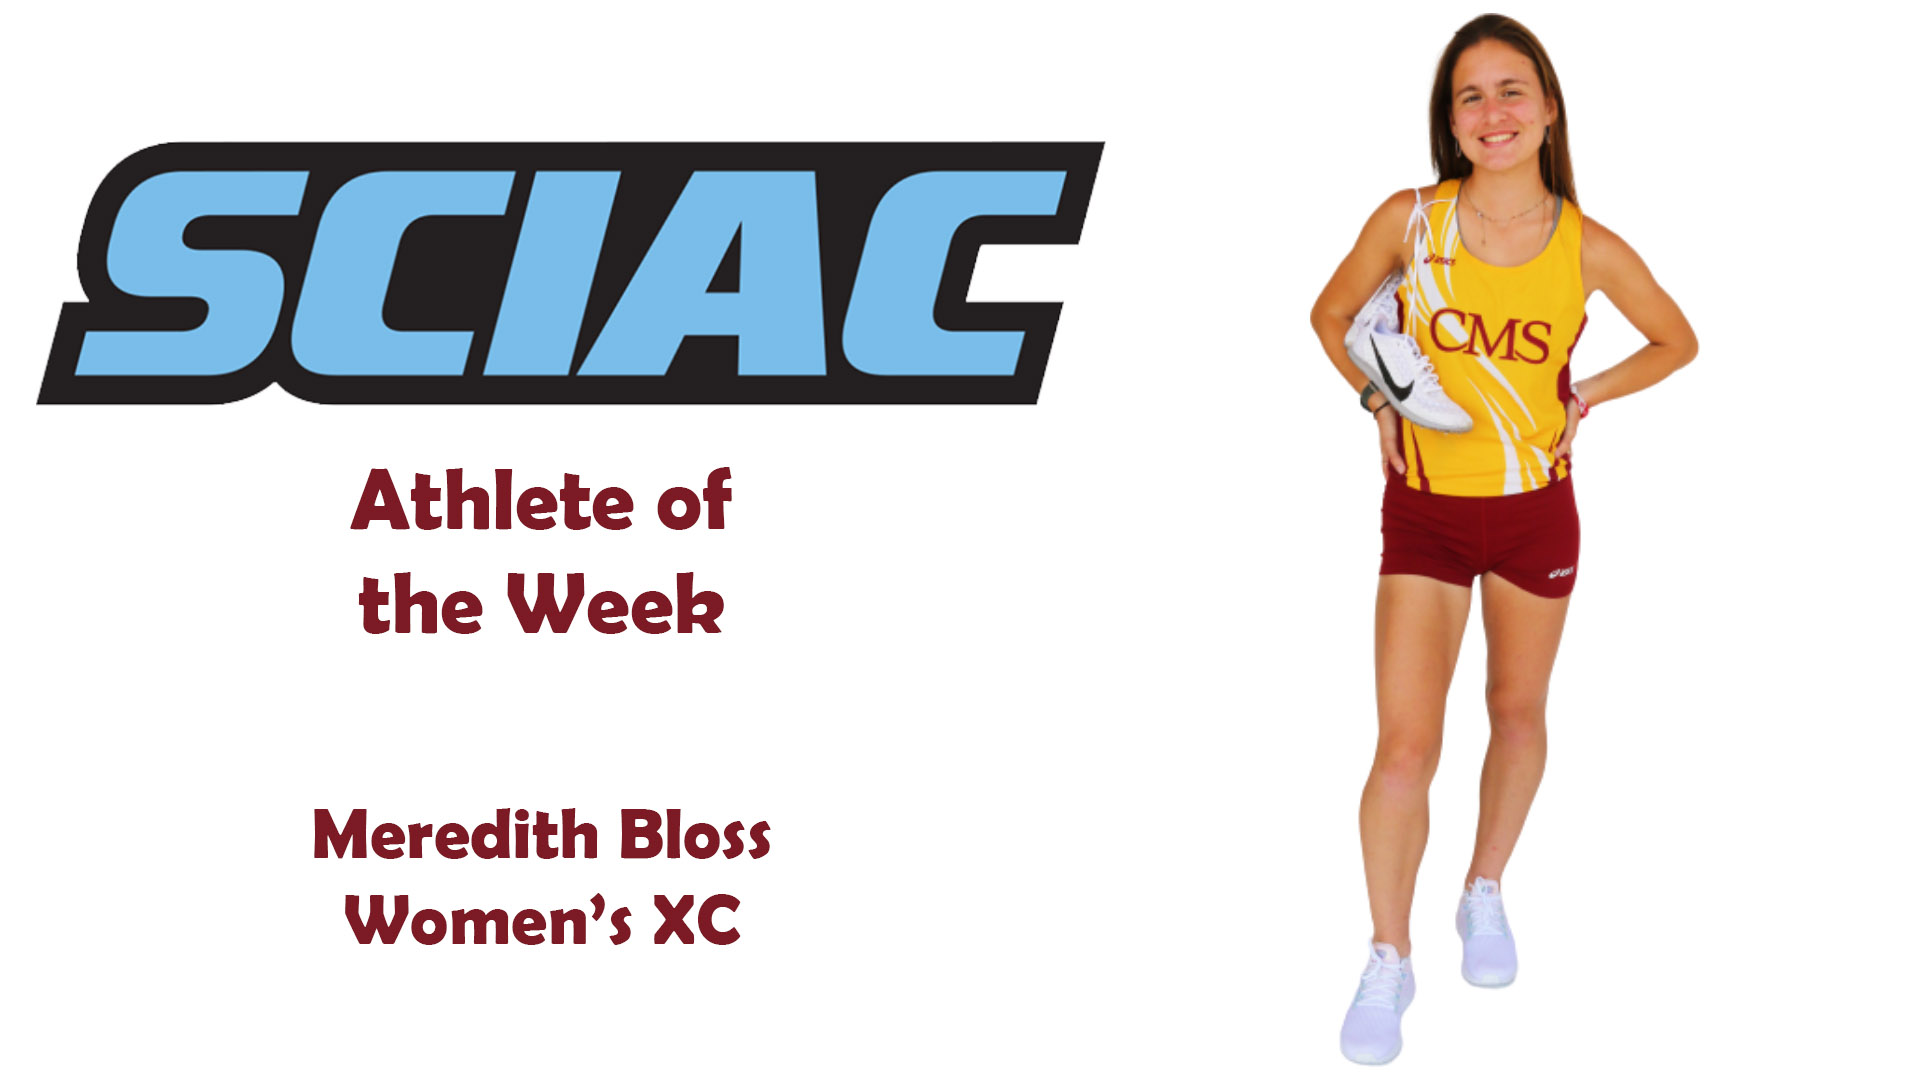 Posed shot of Meredith Bloss with the SCIAC logo